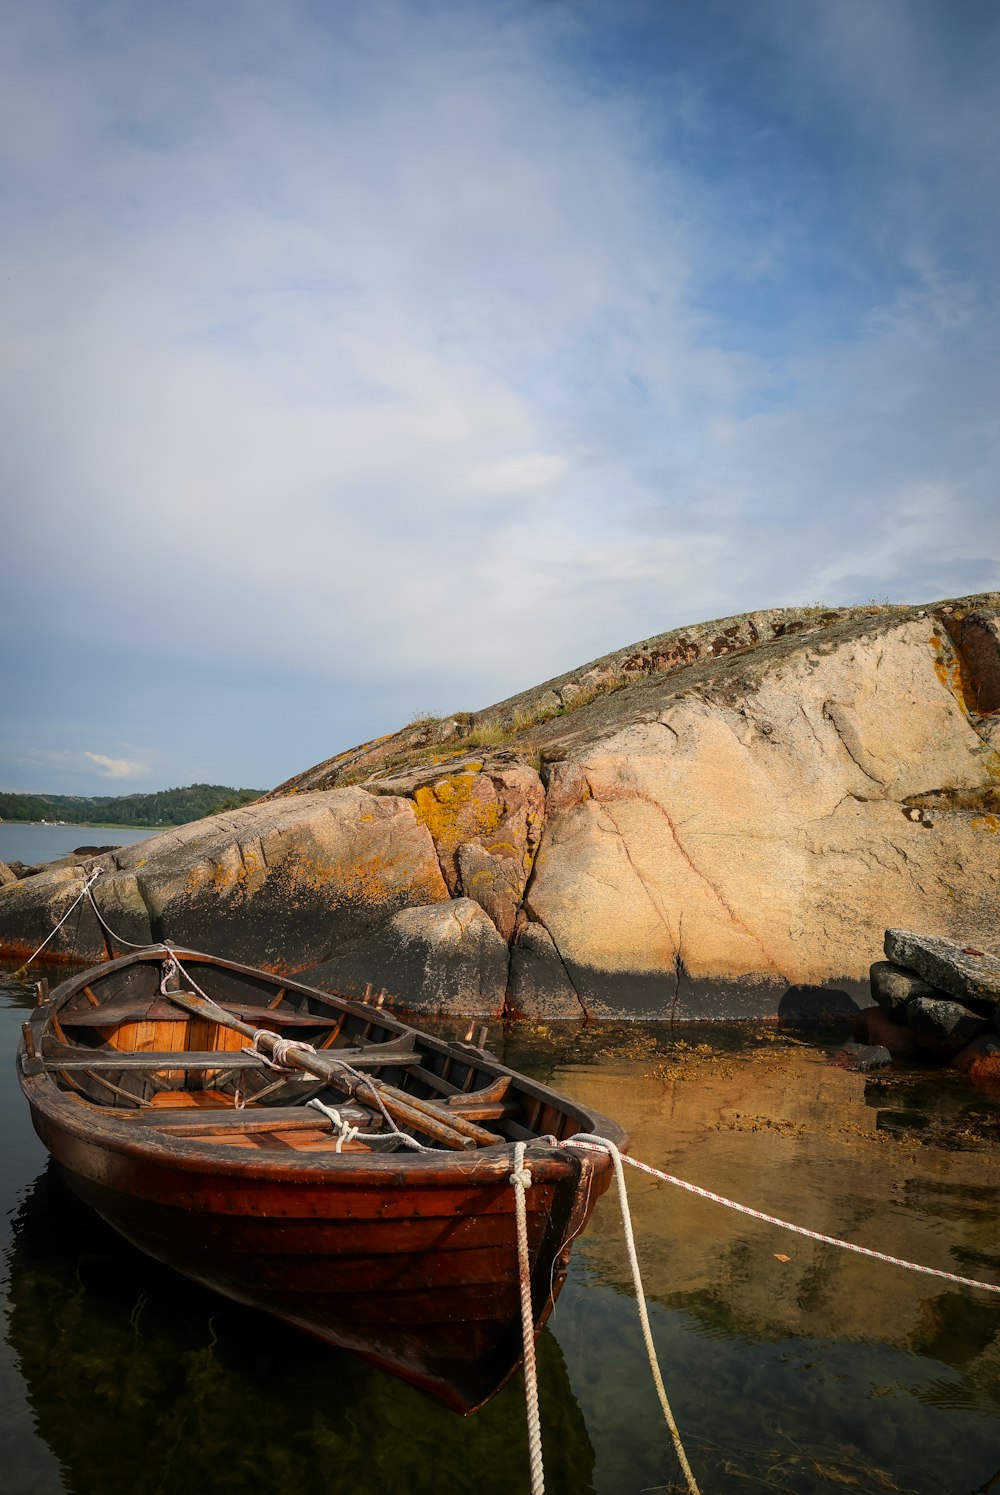 brown wooden boat on shore during daytime